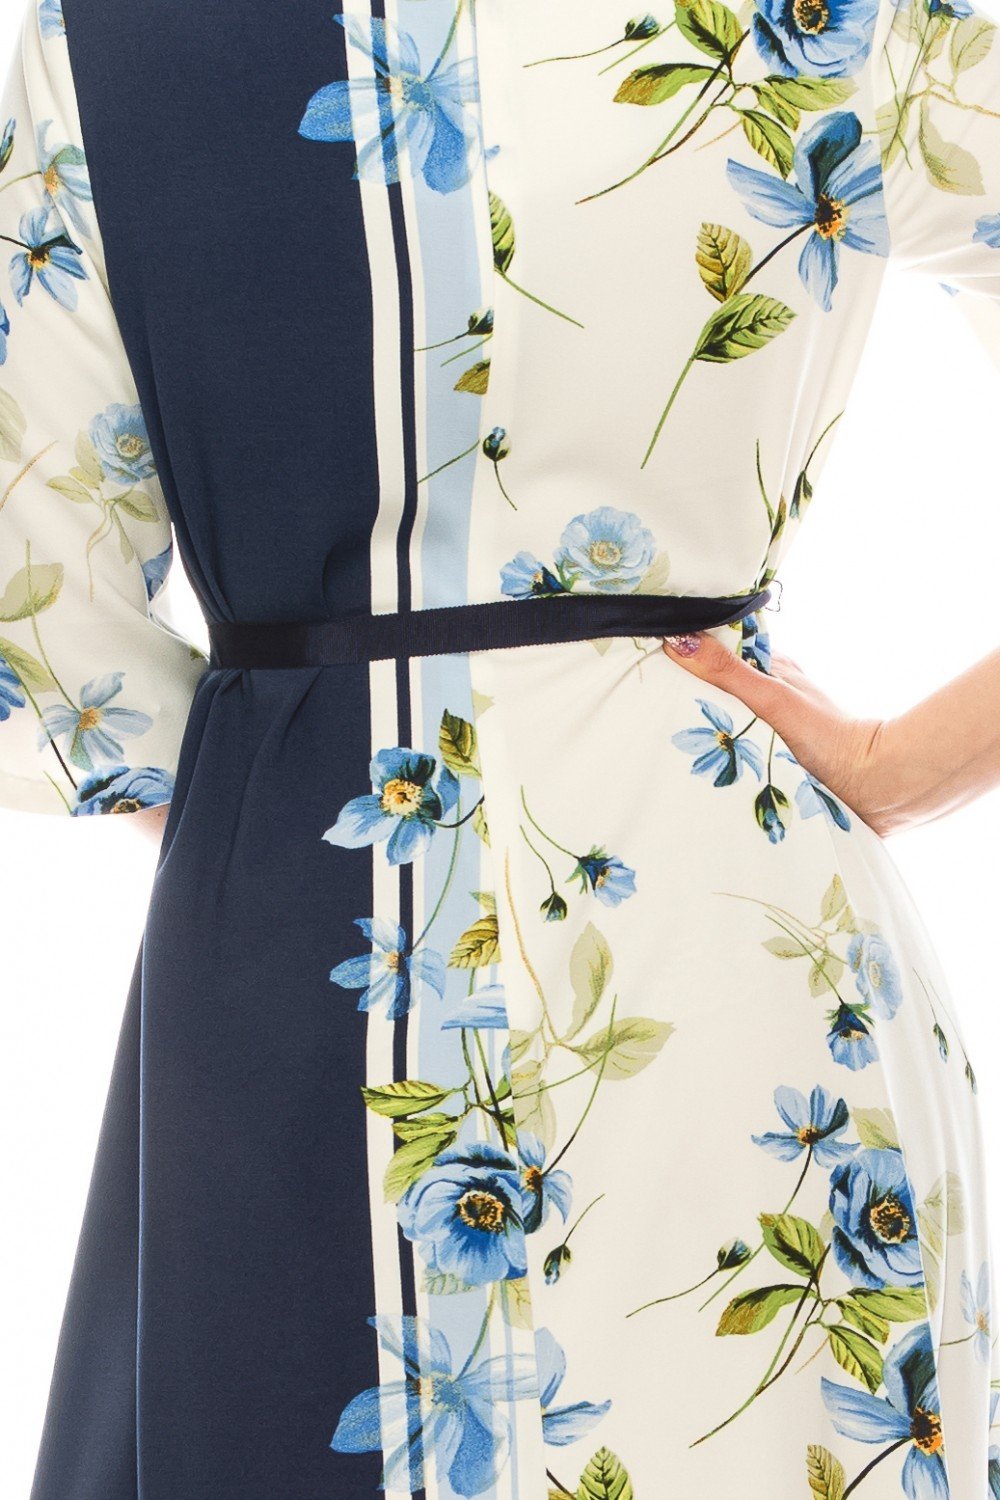 Gabby Skye - 19445M Quarter Length Sleeve Floral Dress In White and Blue